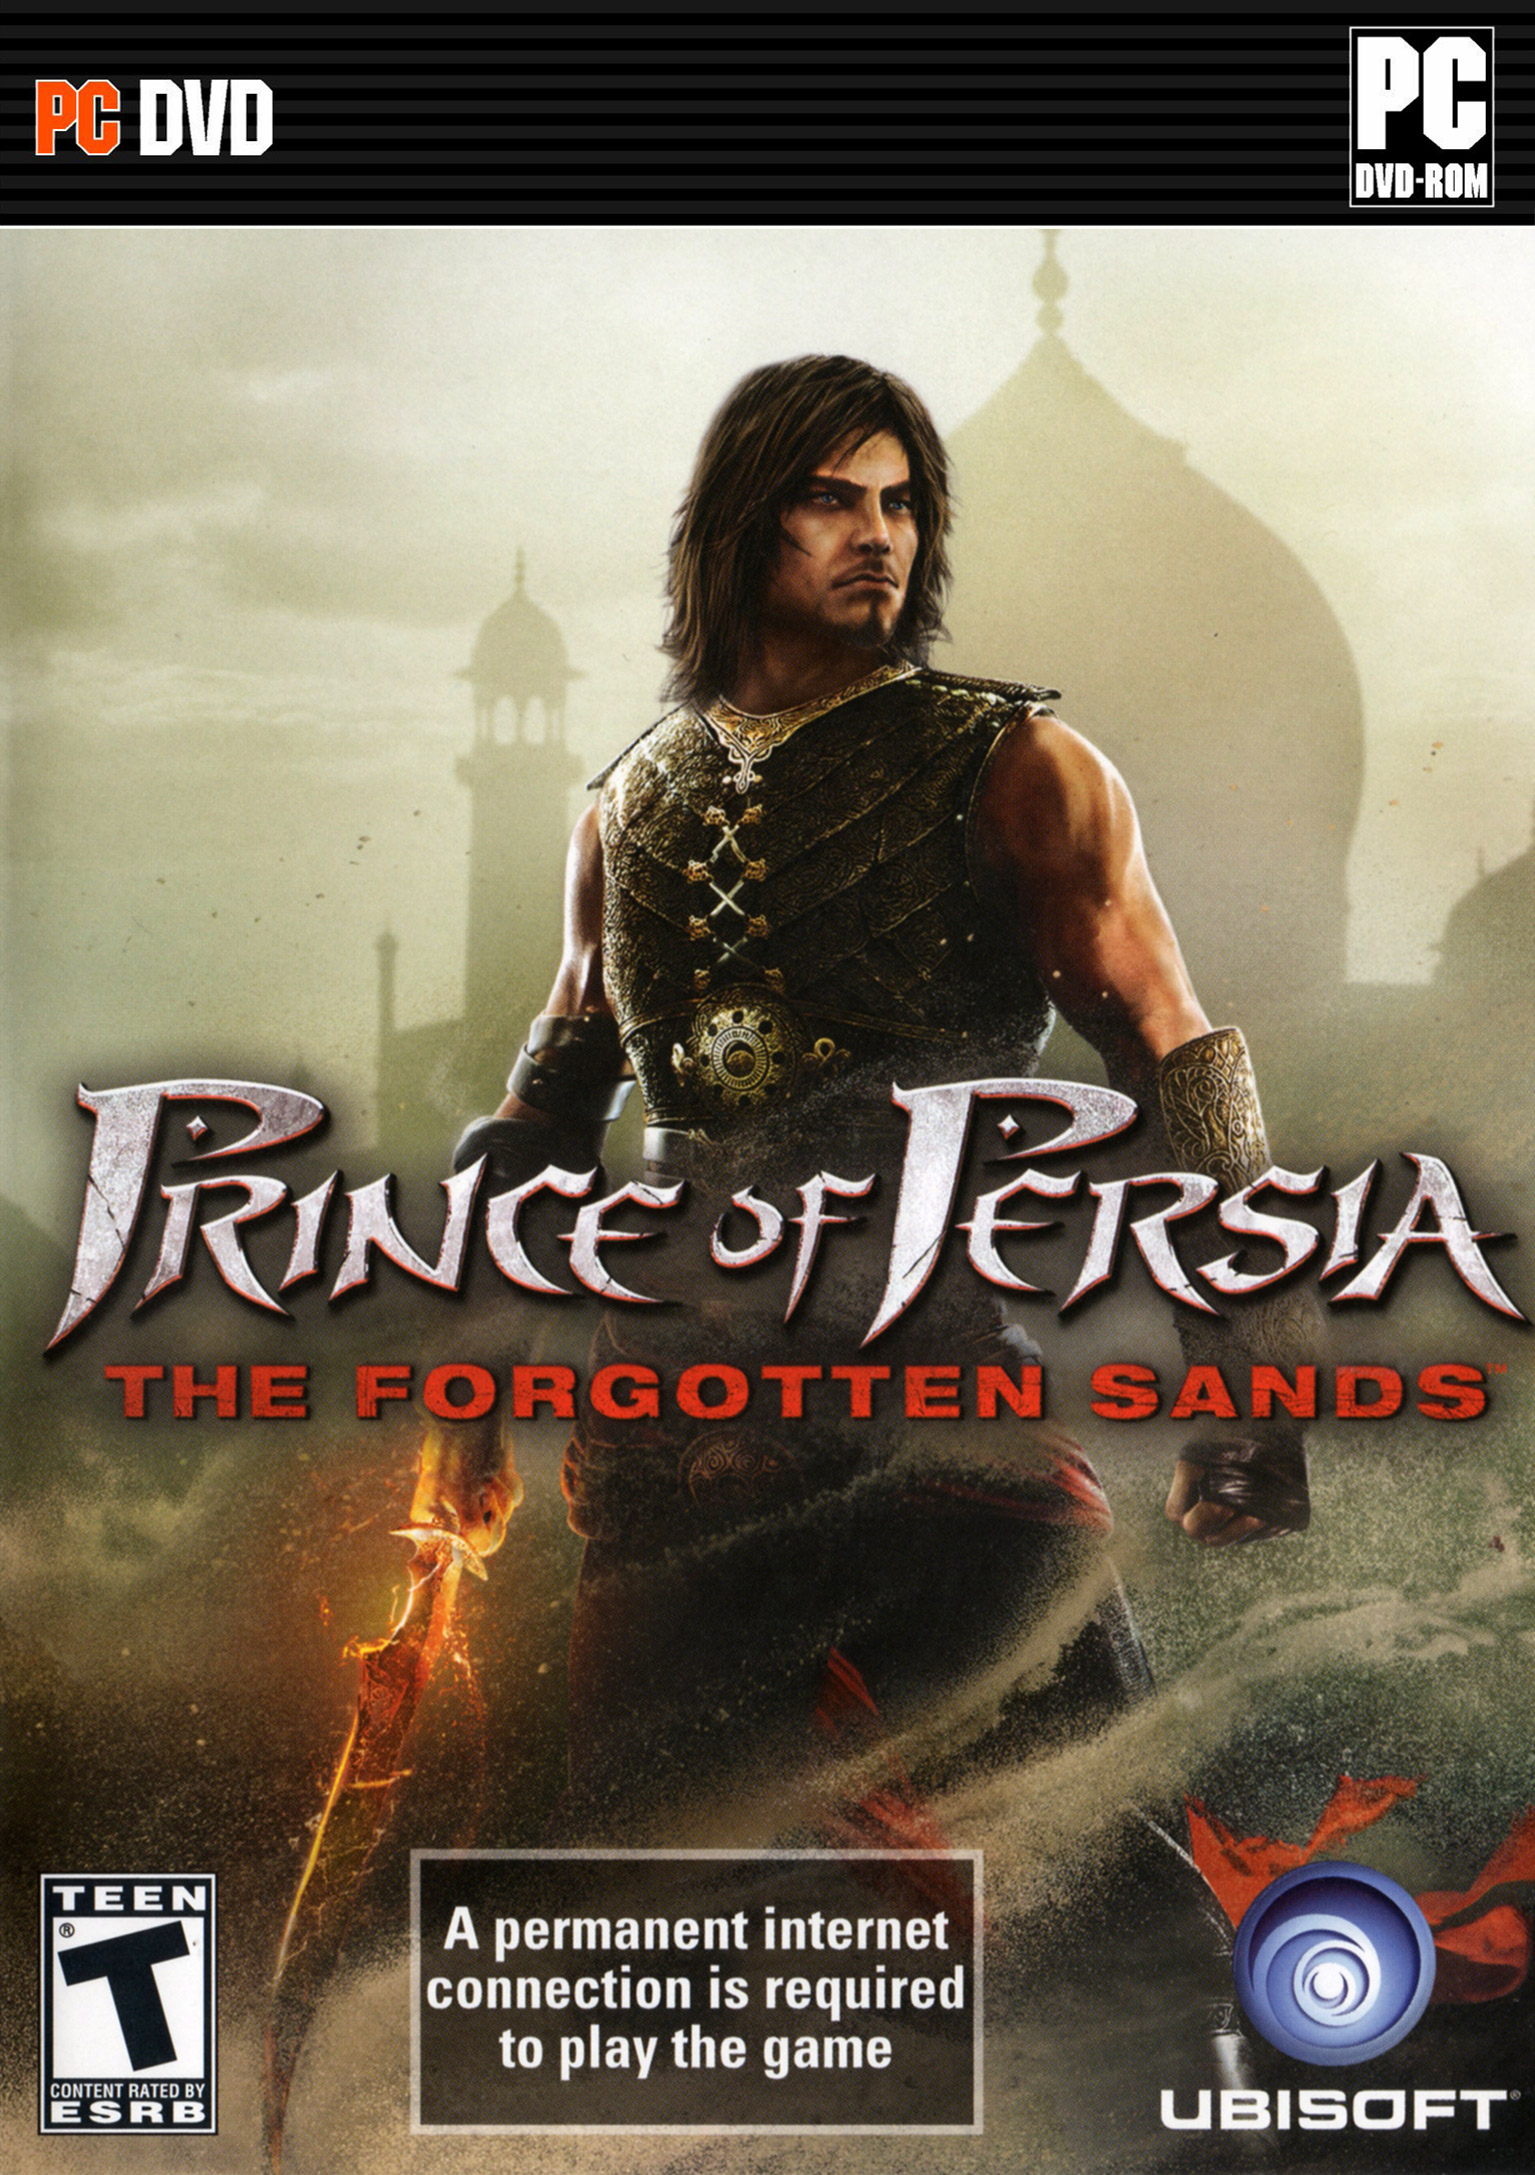 Prince of Persia: The Forgotten Sands - pedn DVD obal 2